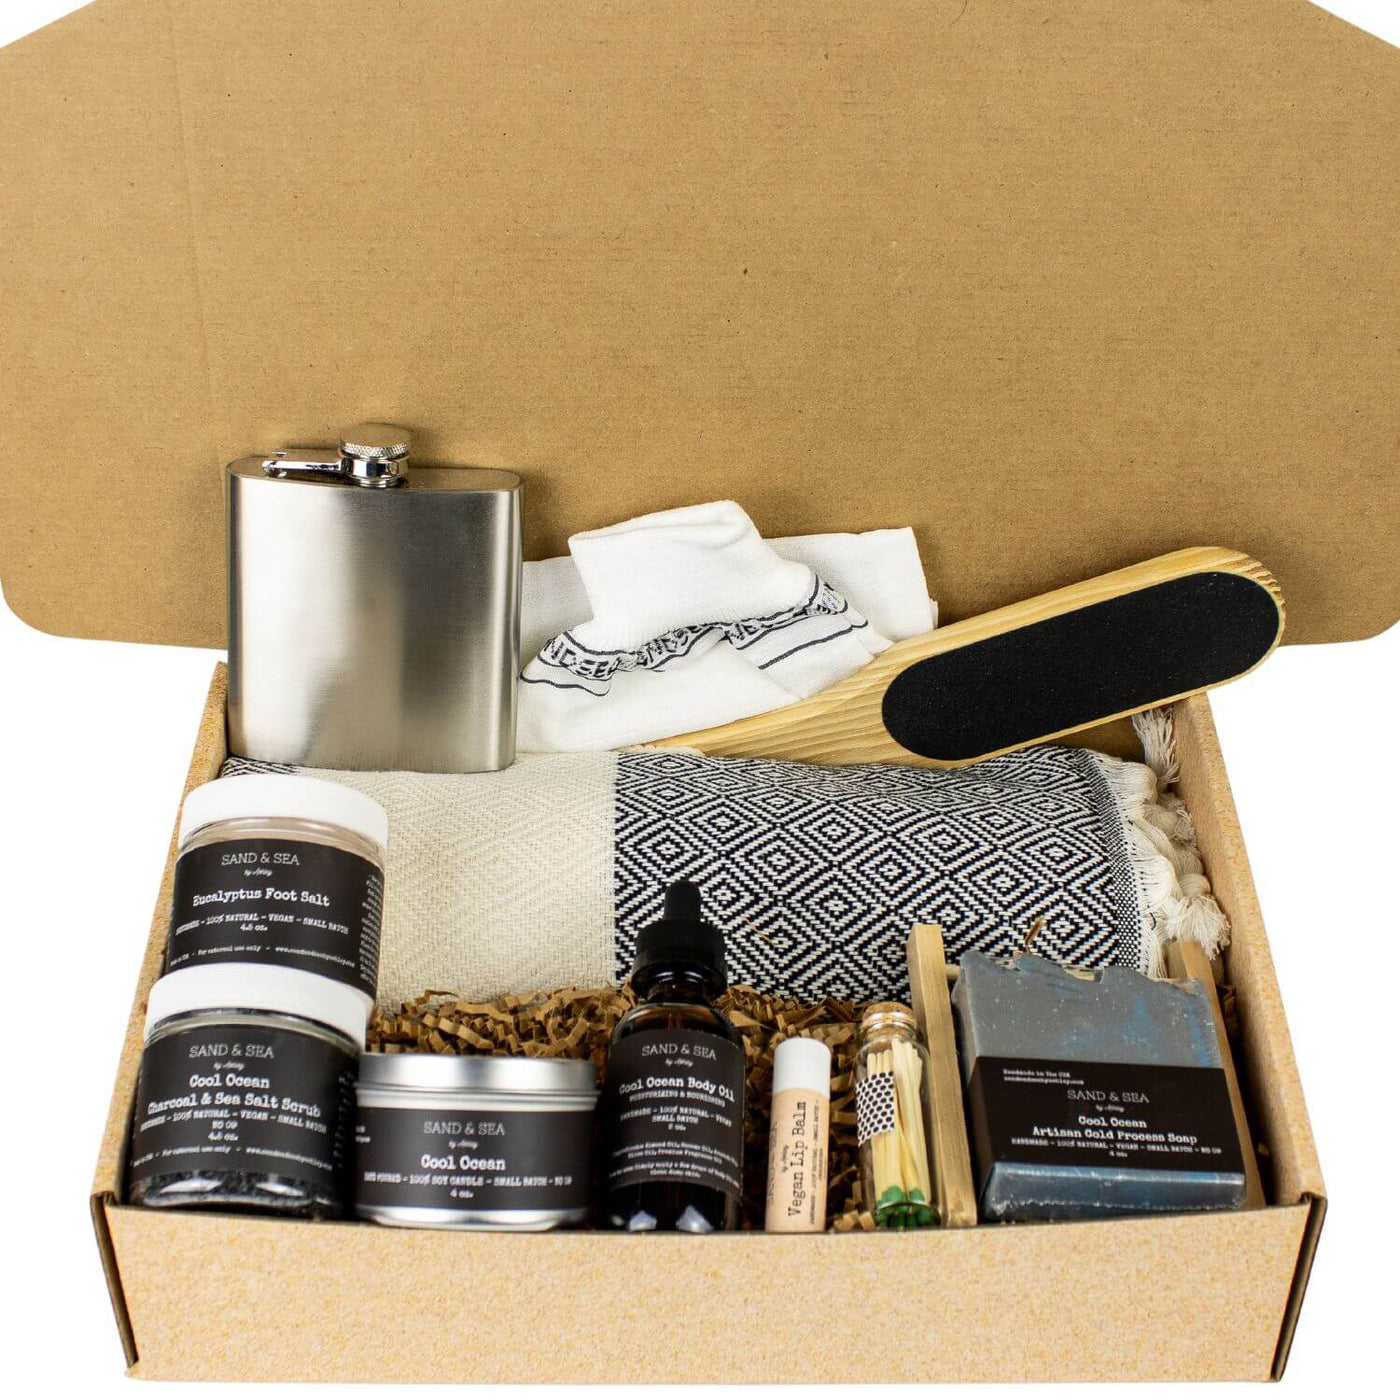 Spa Gift Basket for Him - Unique Gifts & Gift Ideas for Men - Sand & Sea by Ashley